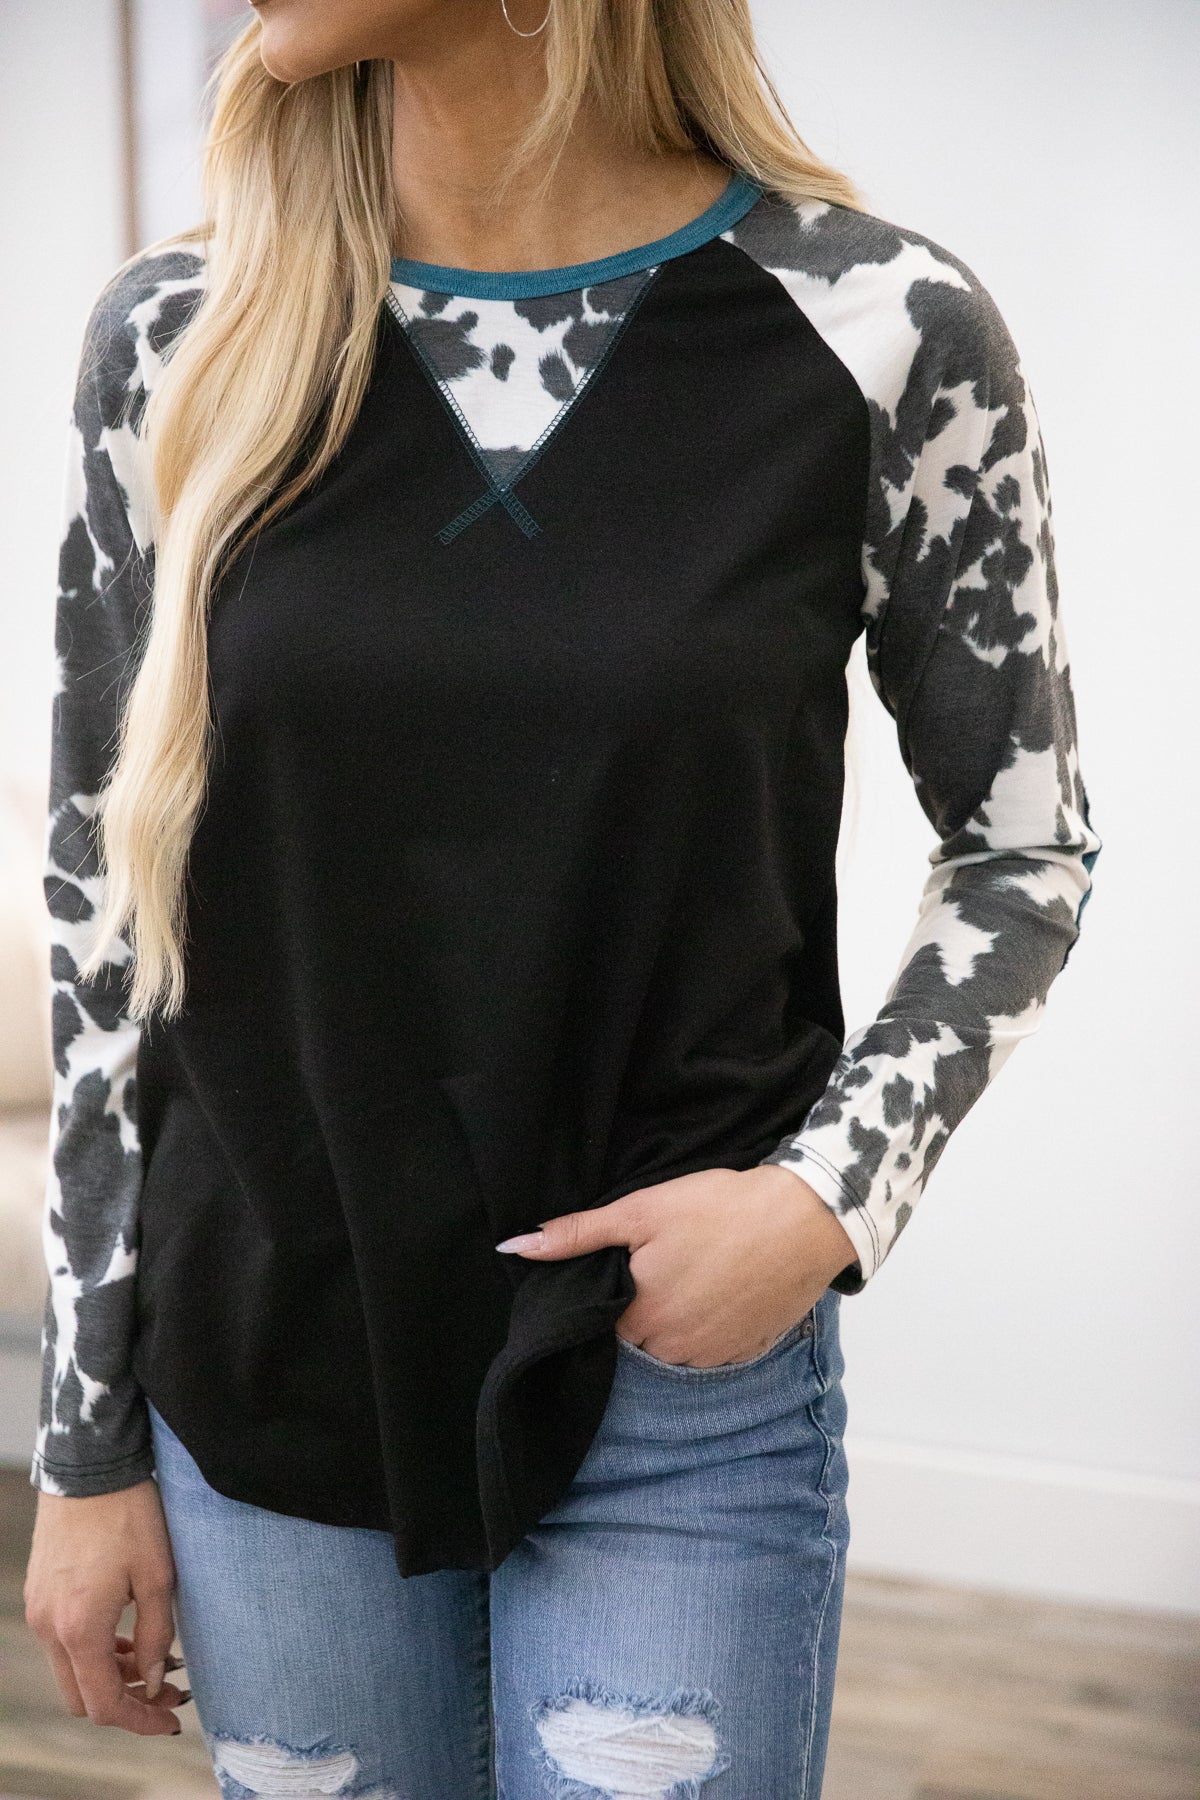 Black Cow Print Sleeve Top with Elbow Patches - Filly Flair